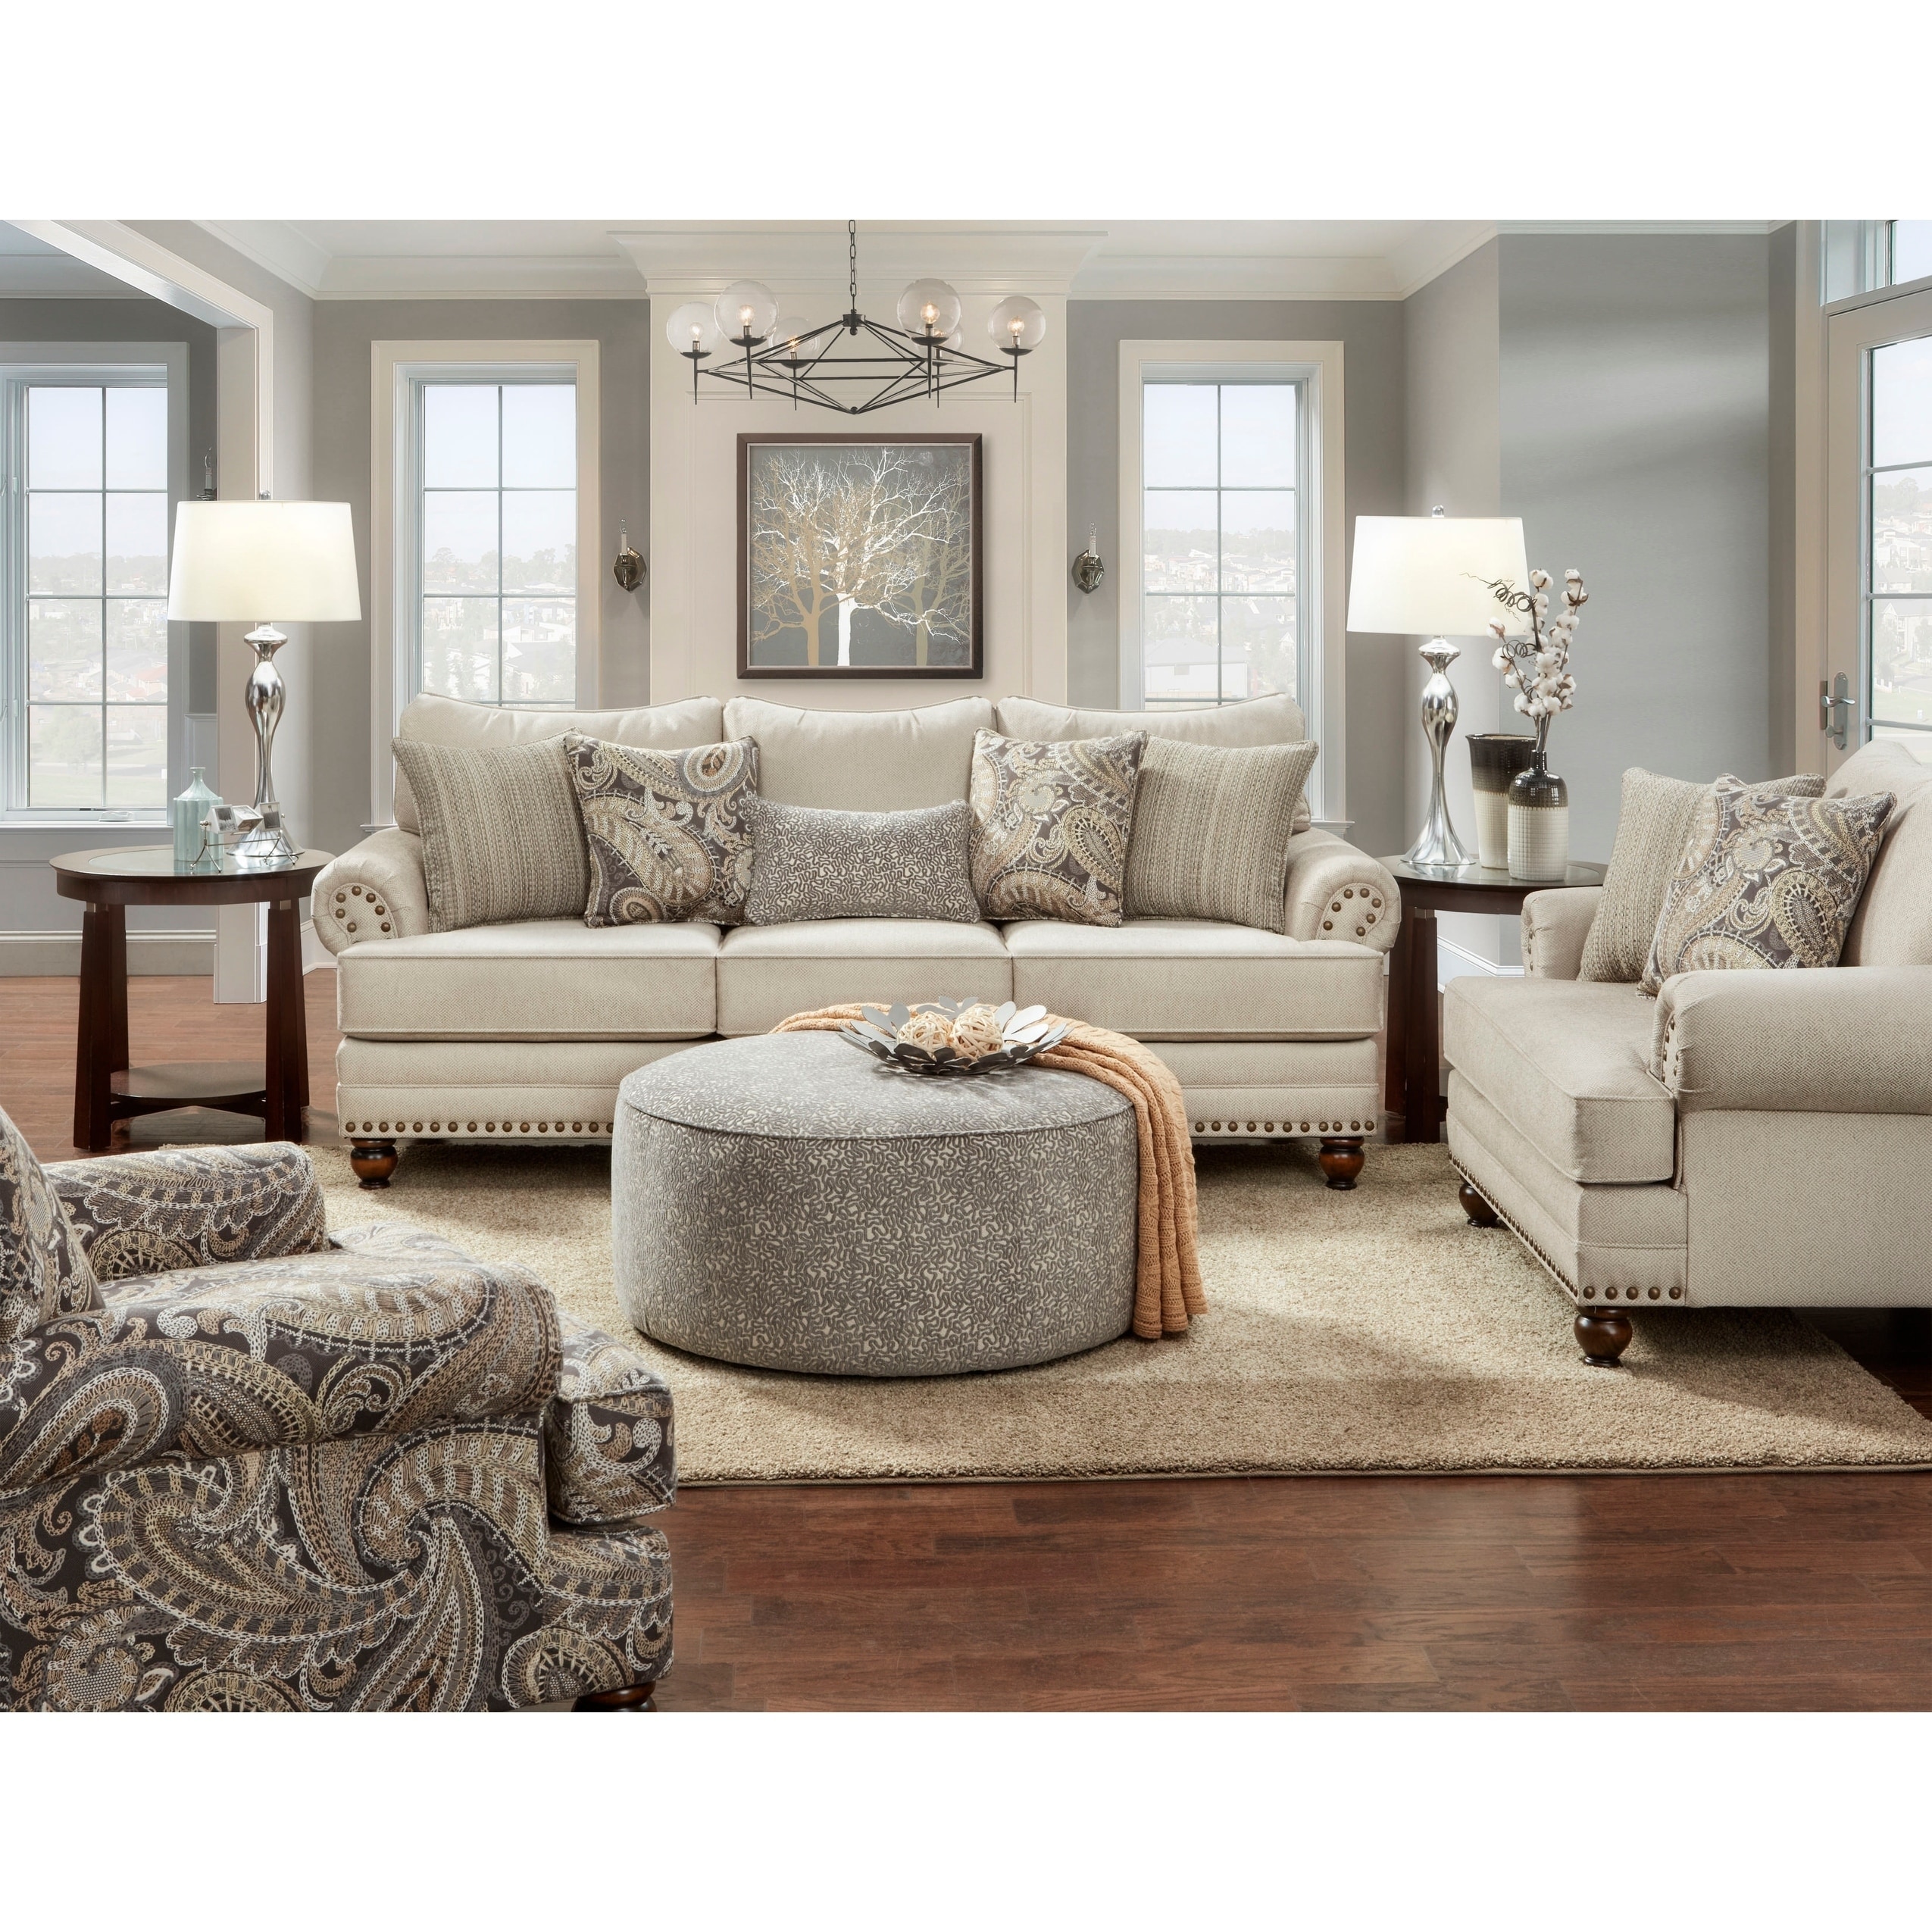 Carys Doe Off White Polyester Sofa On Sale Overstock 24174741